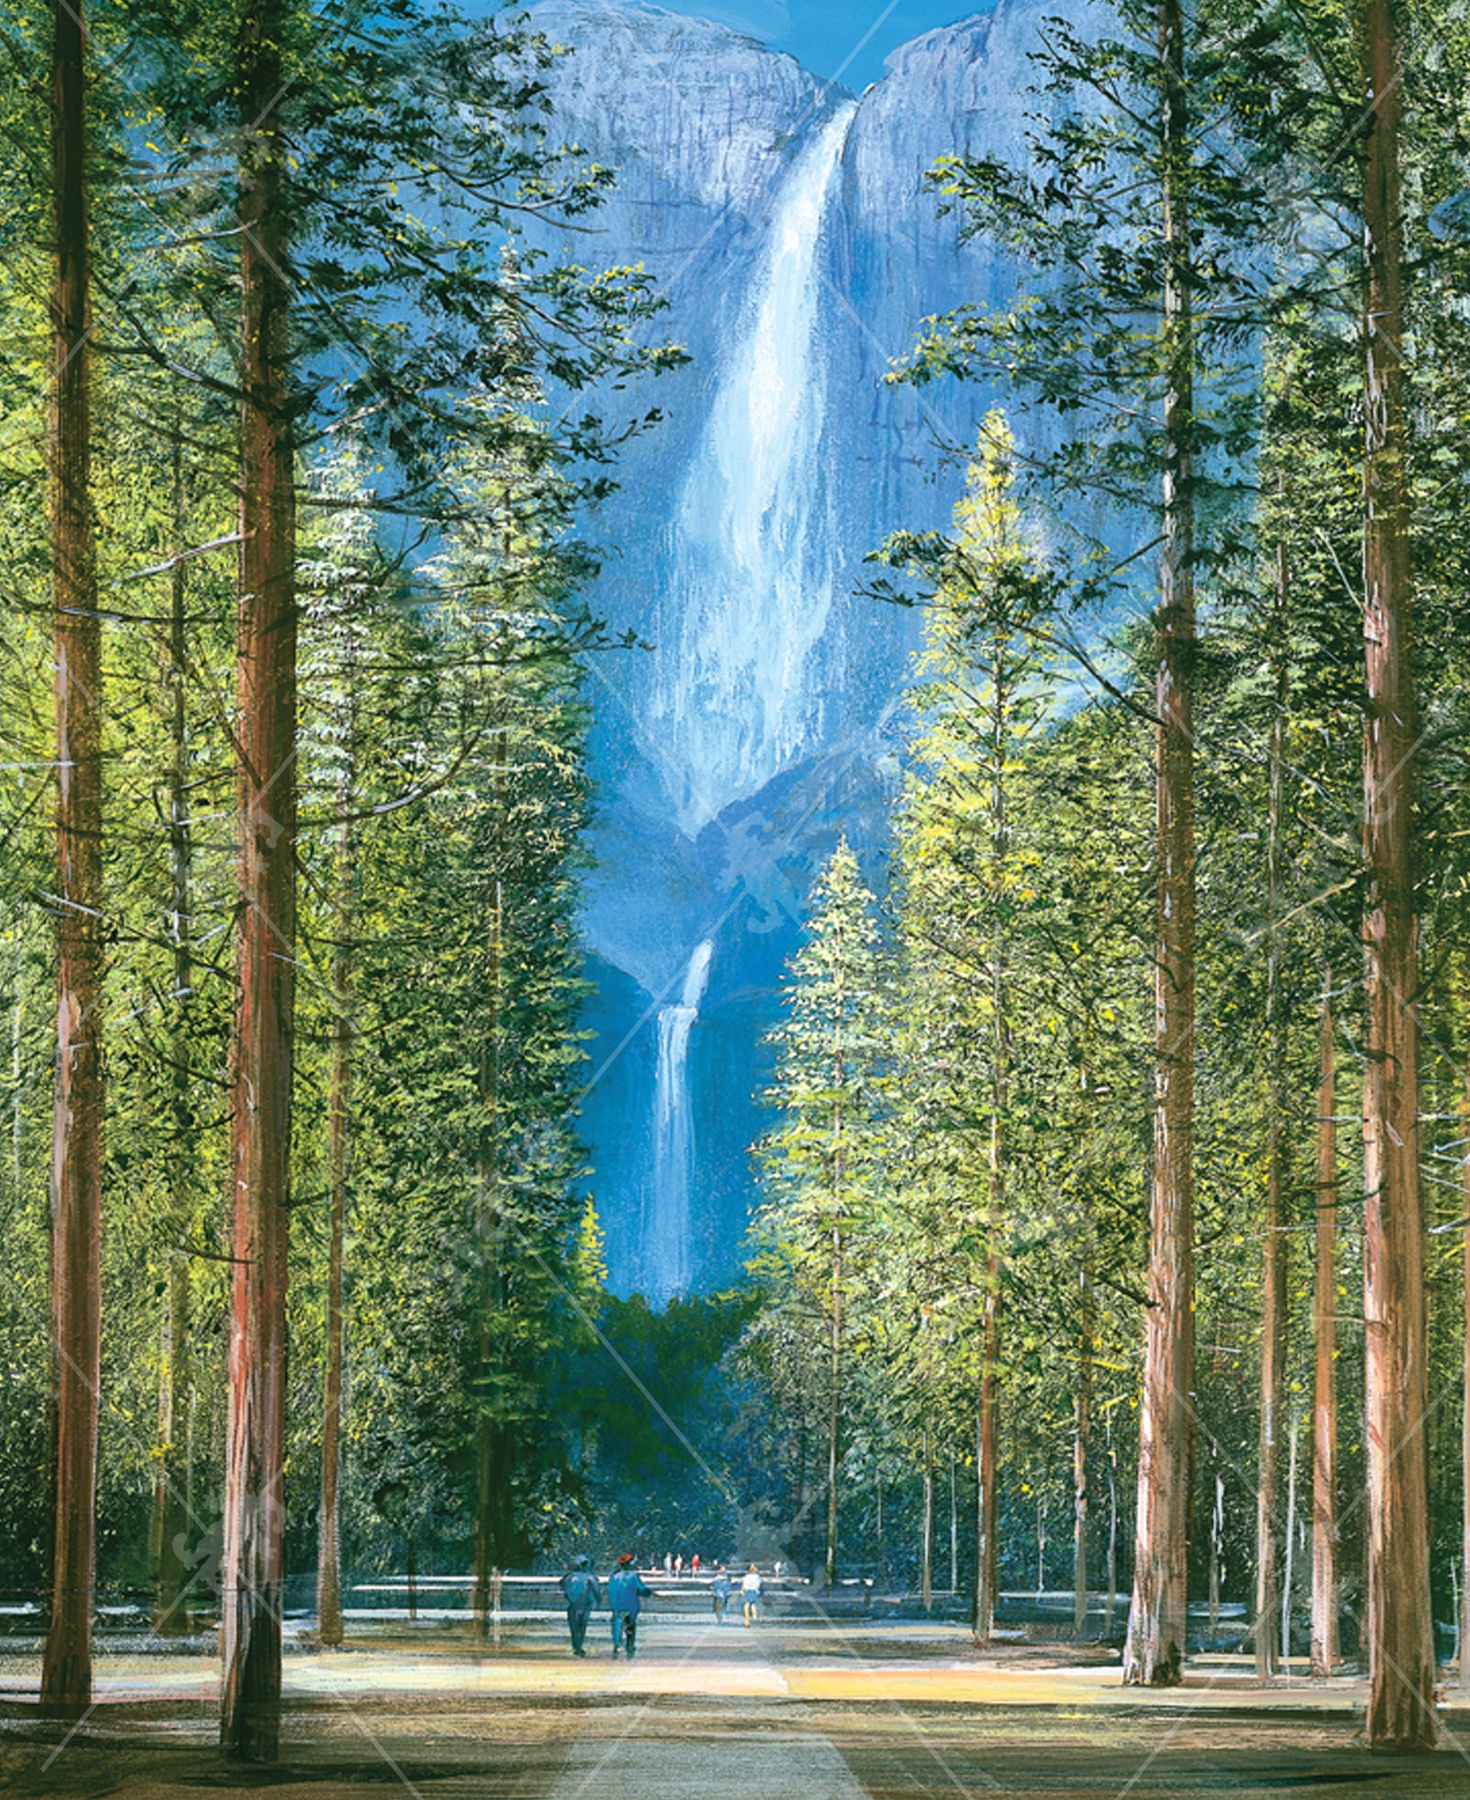 Close-up of Yosemite Falls View wooden jigsaw puzzle uncovering a trail with people walking towards a waterfall. Pine trees stretch tall on both sides of the trail, with a clear view of the falls in the center.